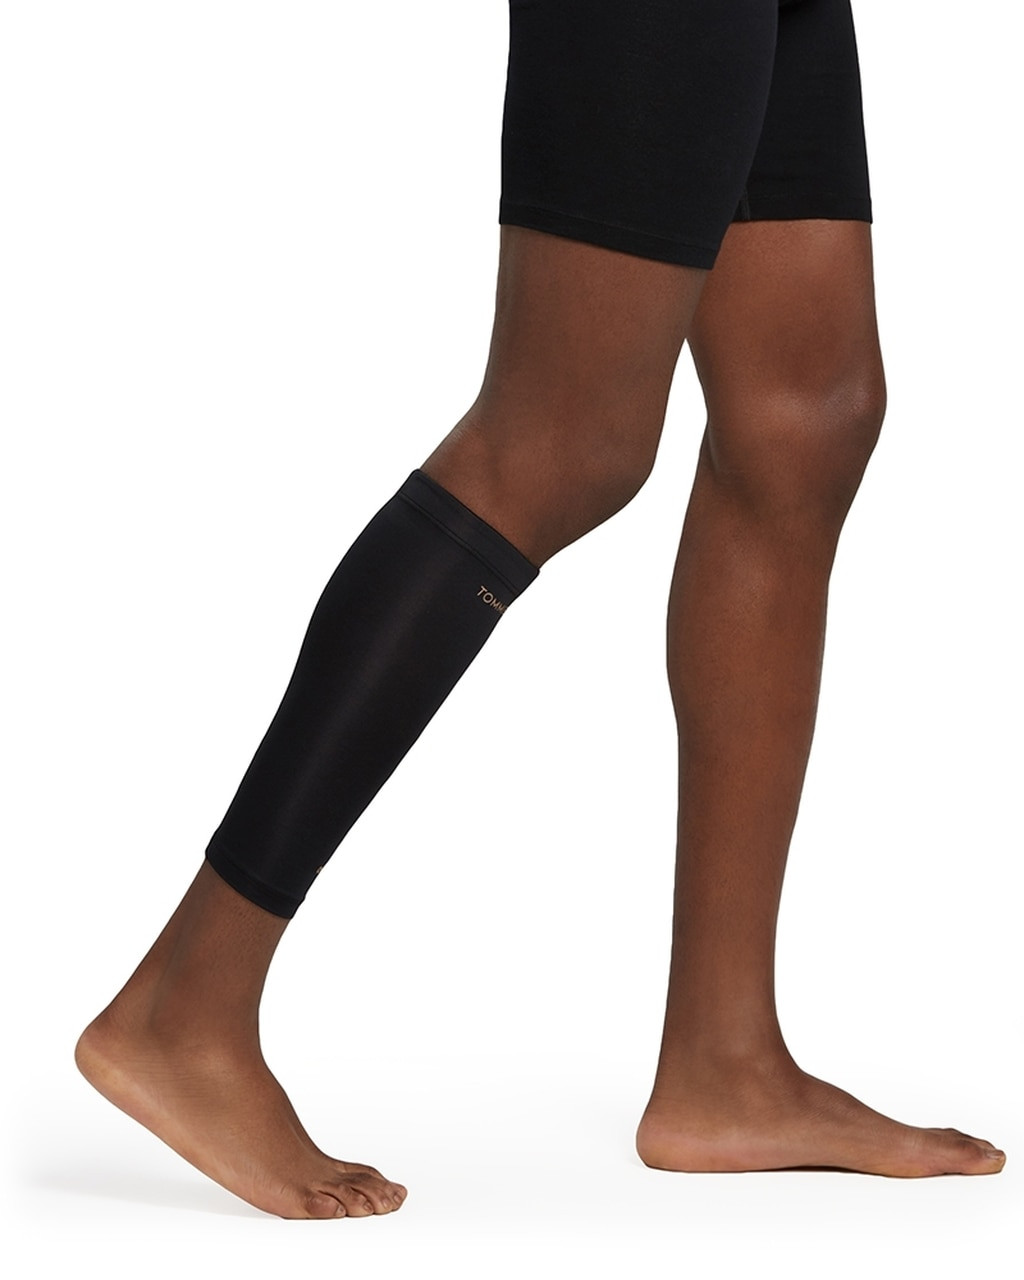 Blinkkart Copper Calf Compression Sleeves fit (1 Pair, Free Size) 